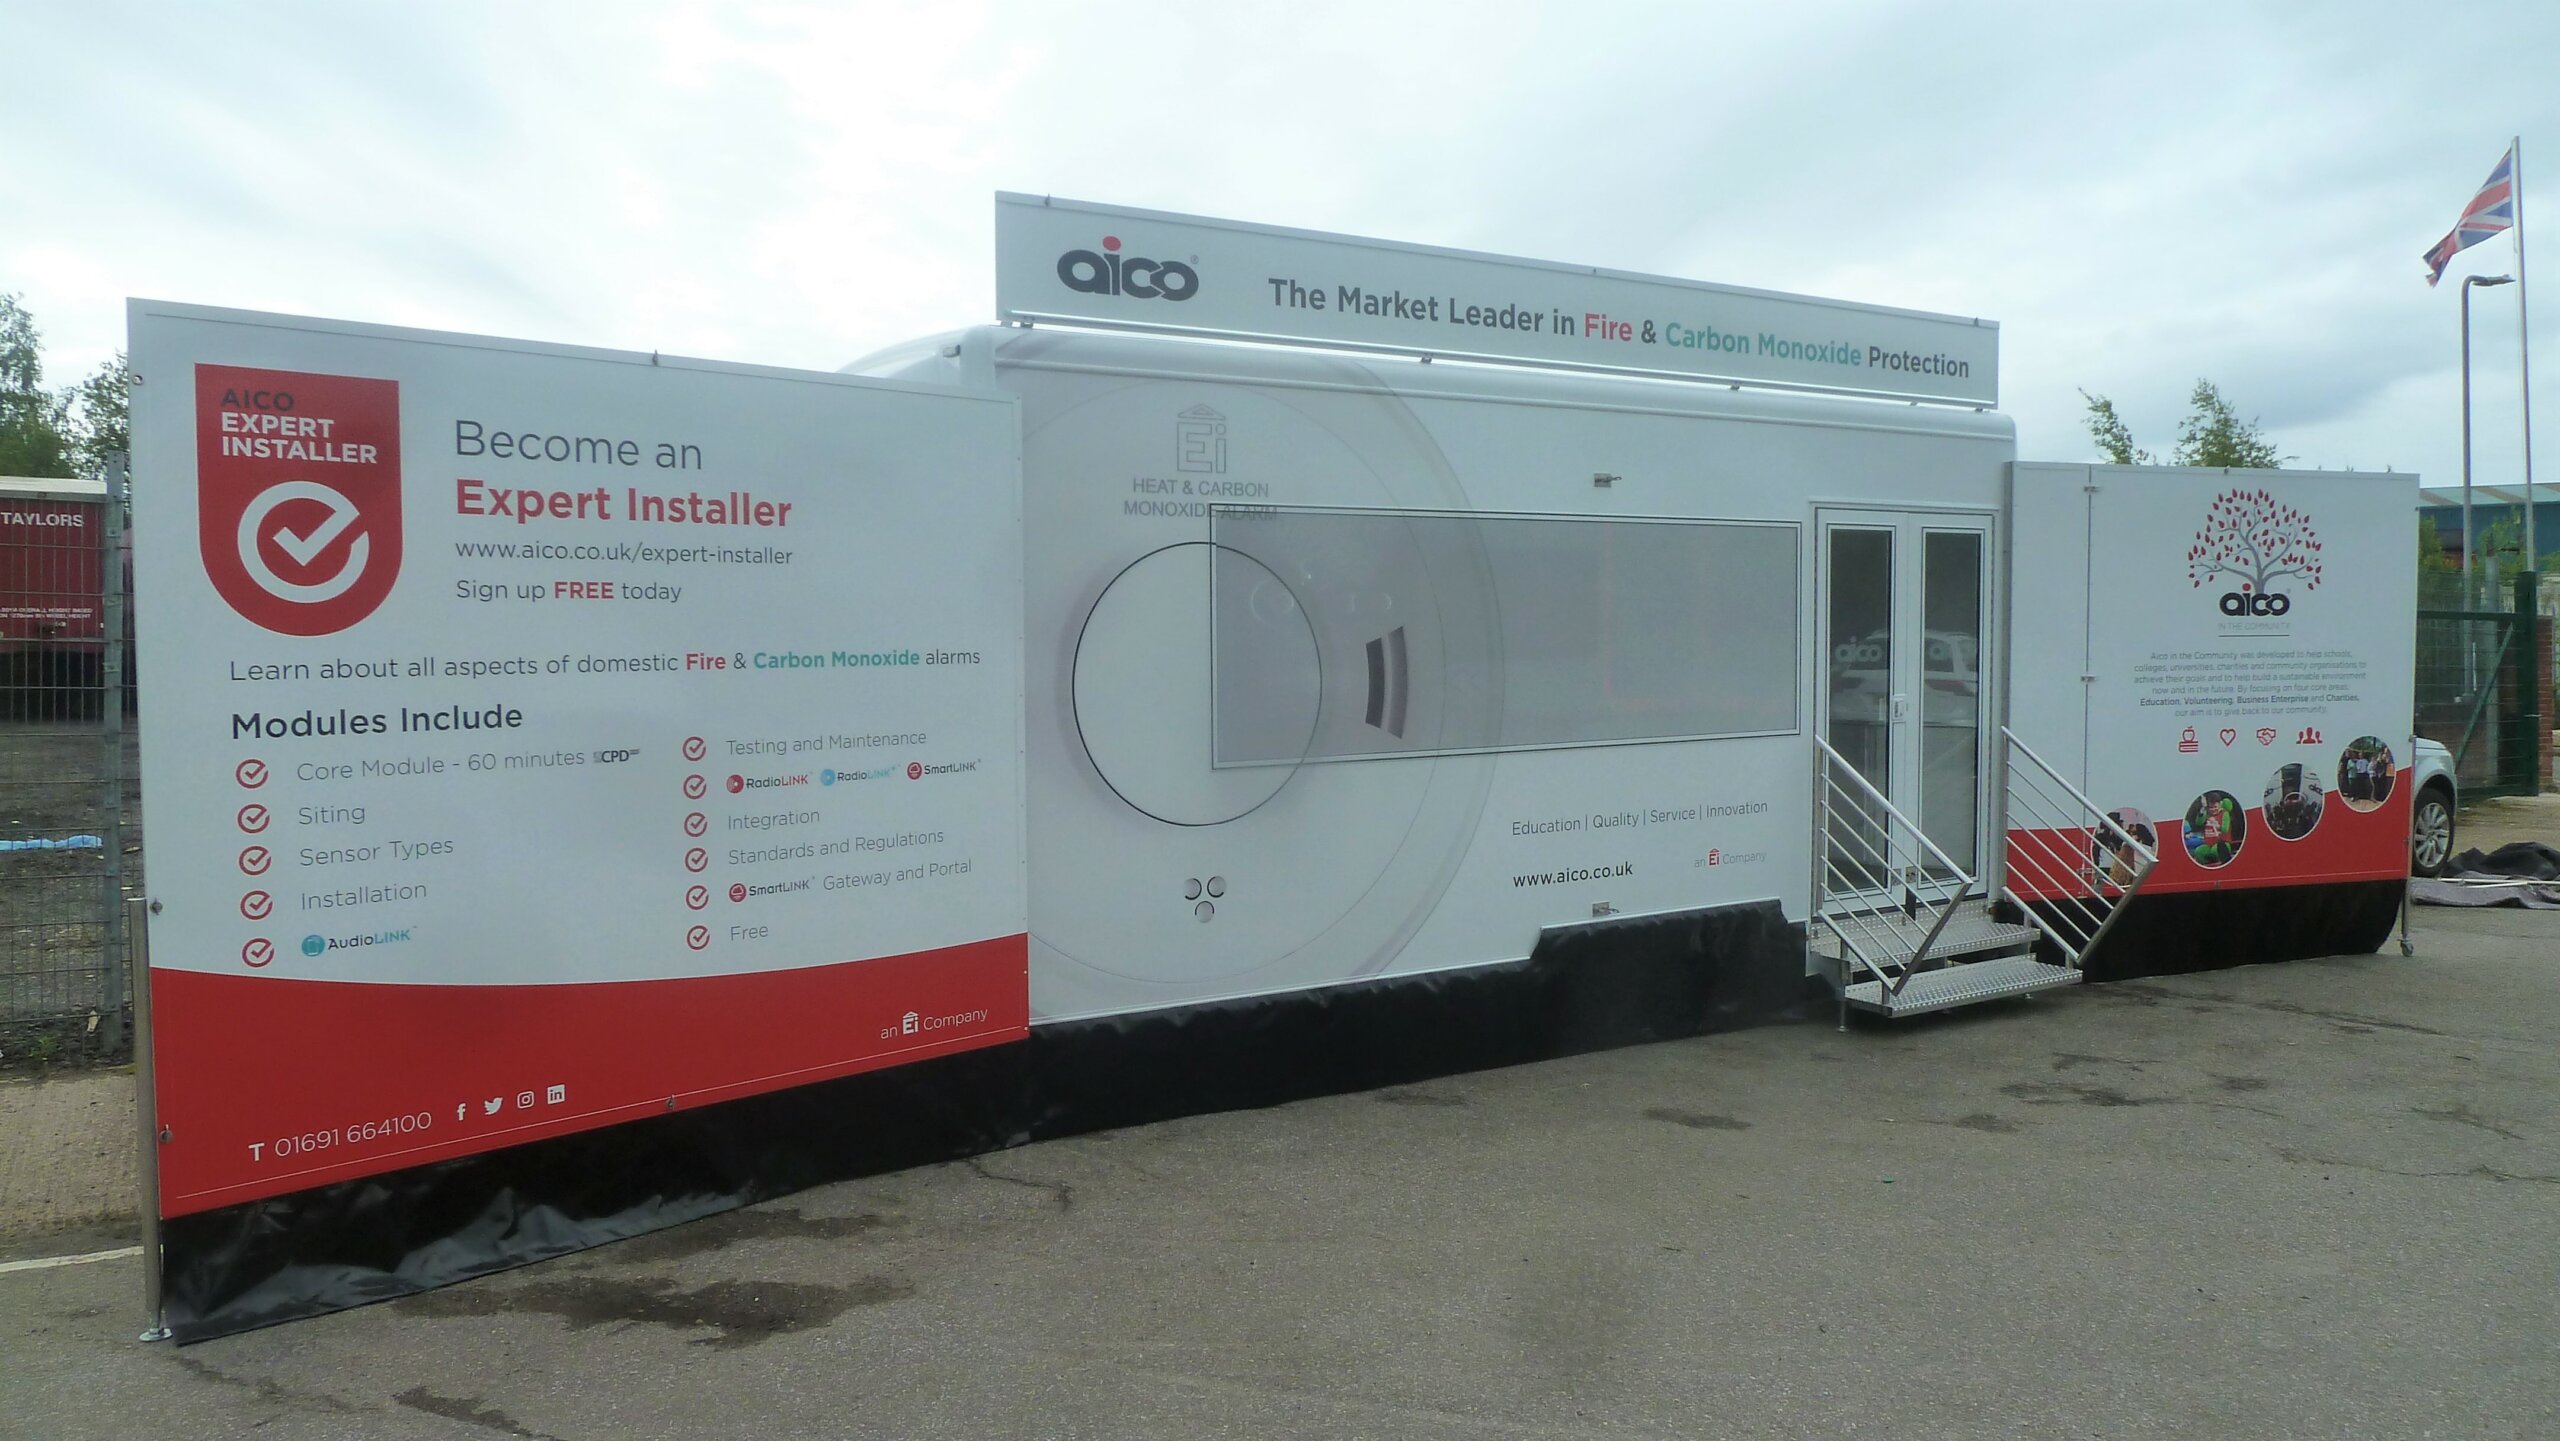 Aico Non-Expandable 5,000 Kg Training, Exhibition and Demonstration vehicle completed